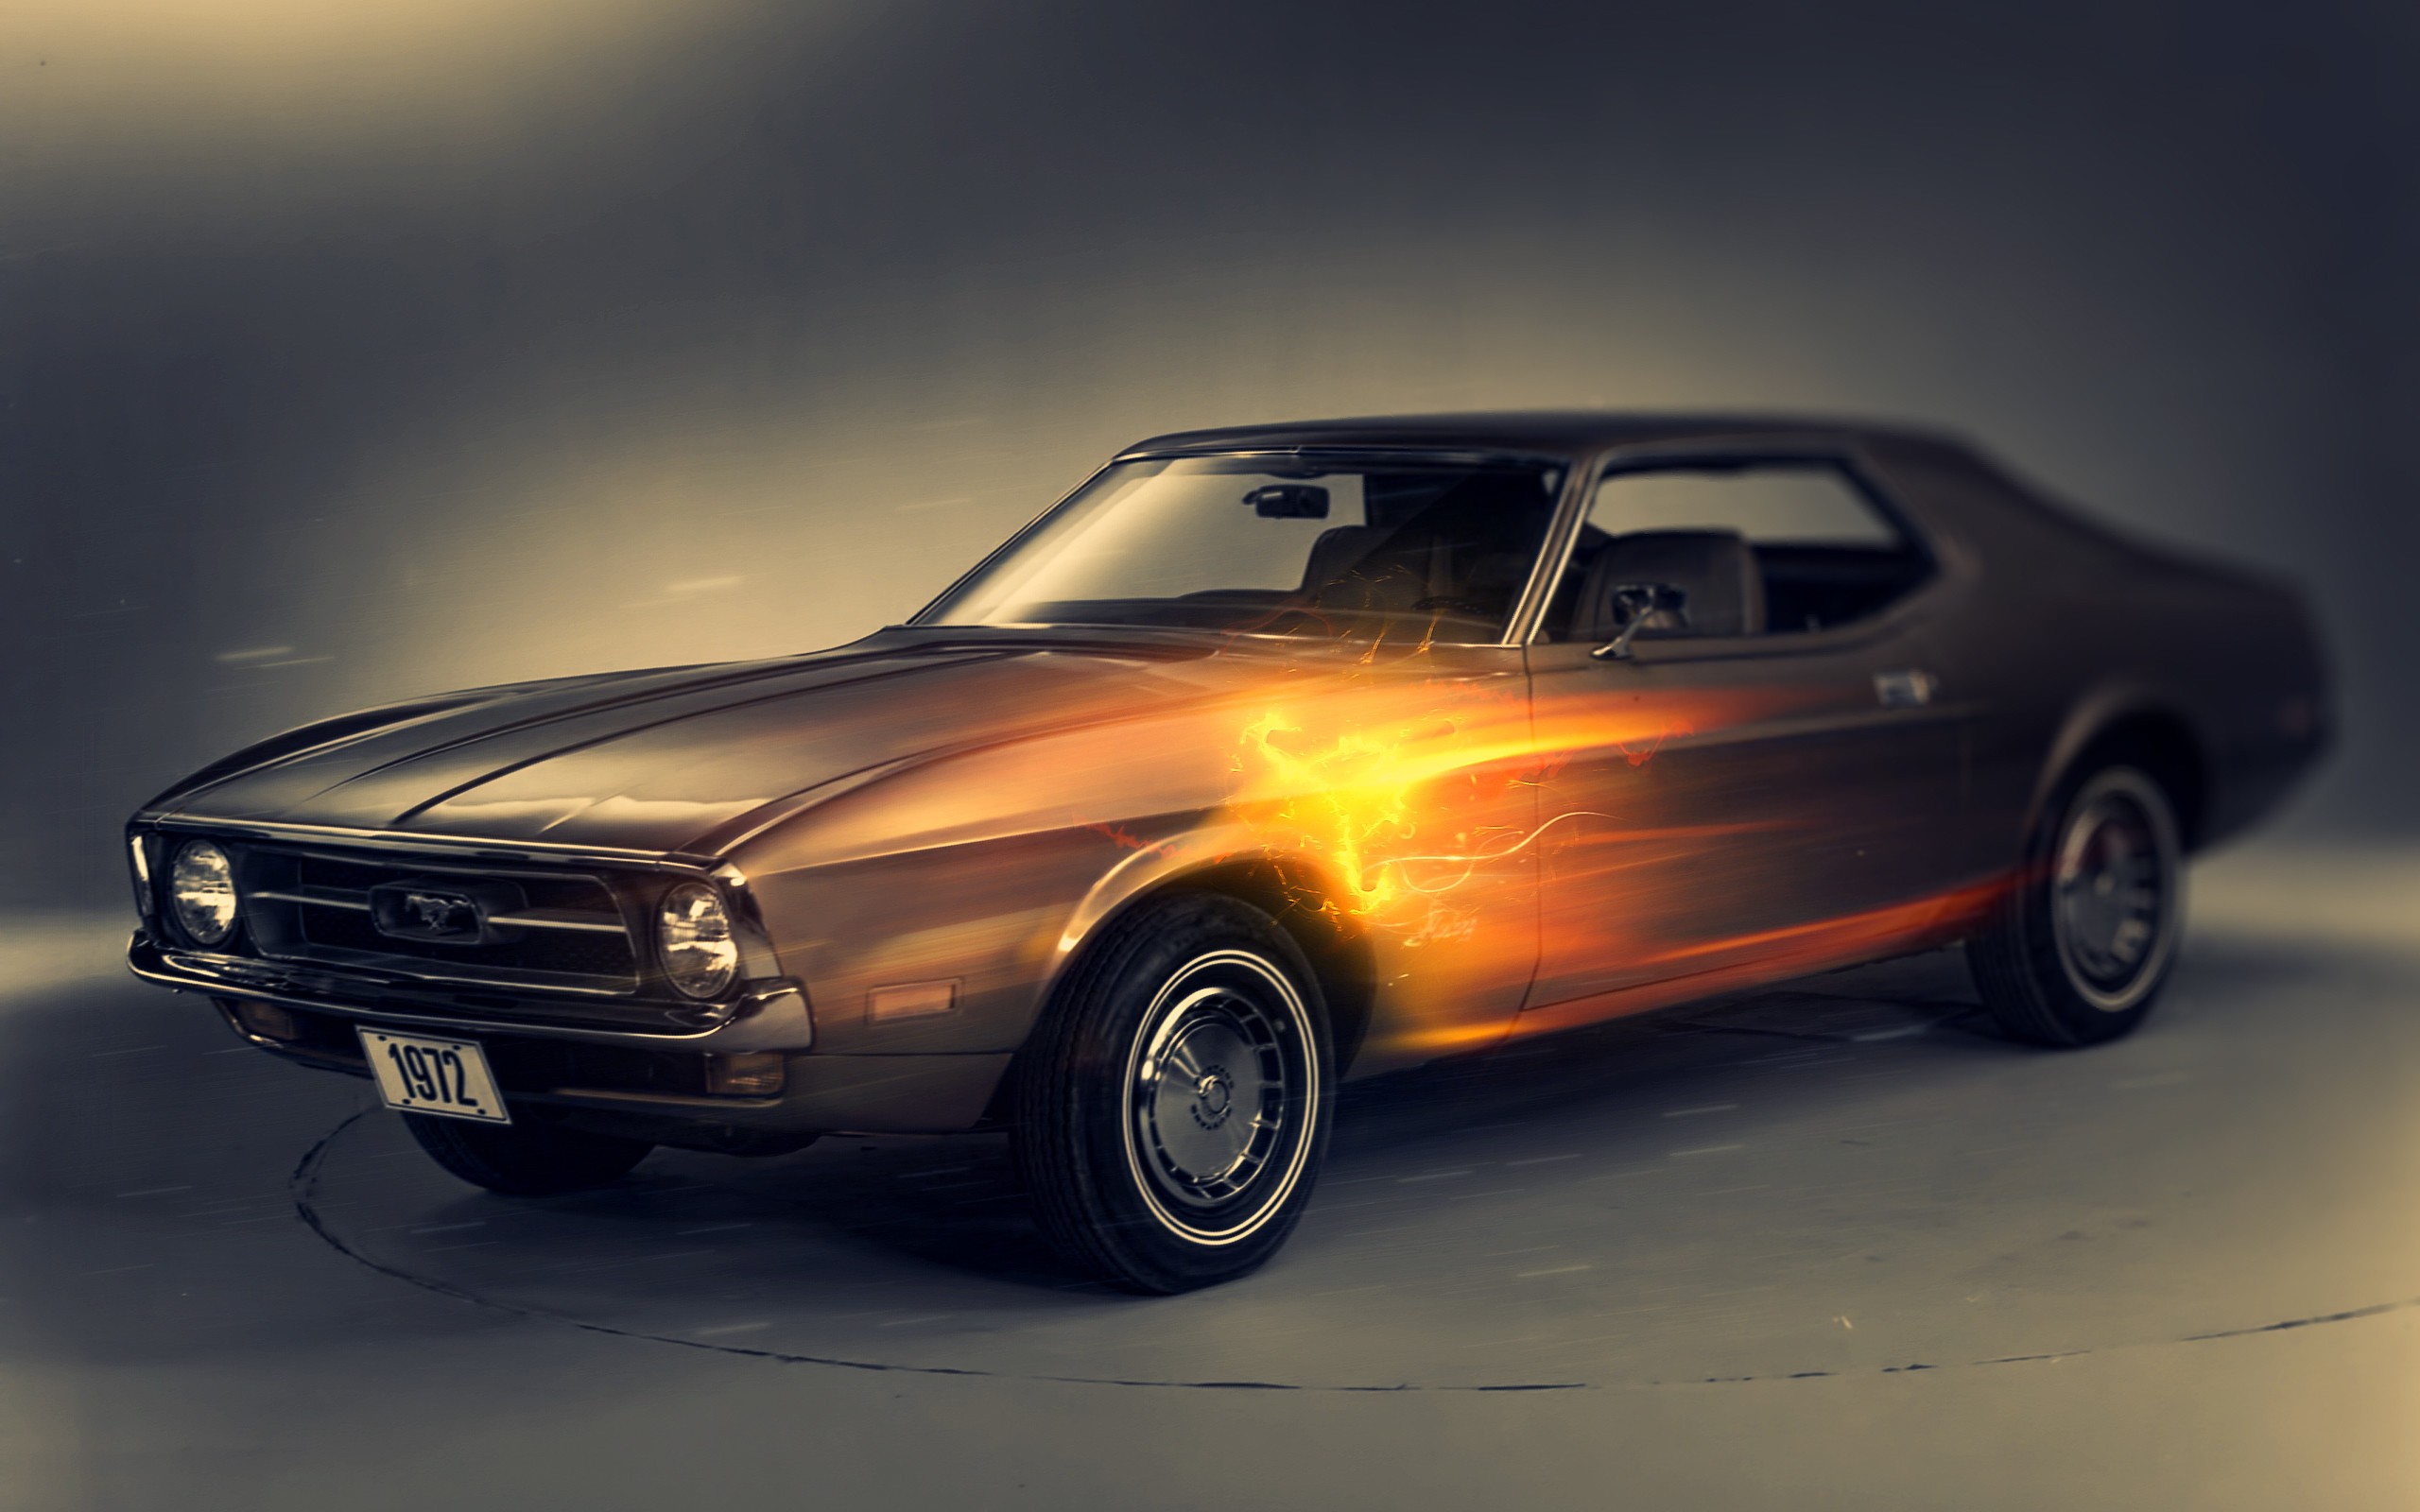 2560x1600 Ford Mustang Giugiaro Wallpaper Ford Cars (54 Wallpapers) – HD Wallpapers